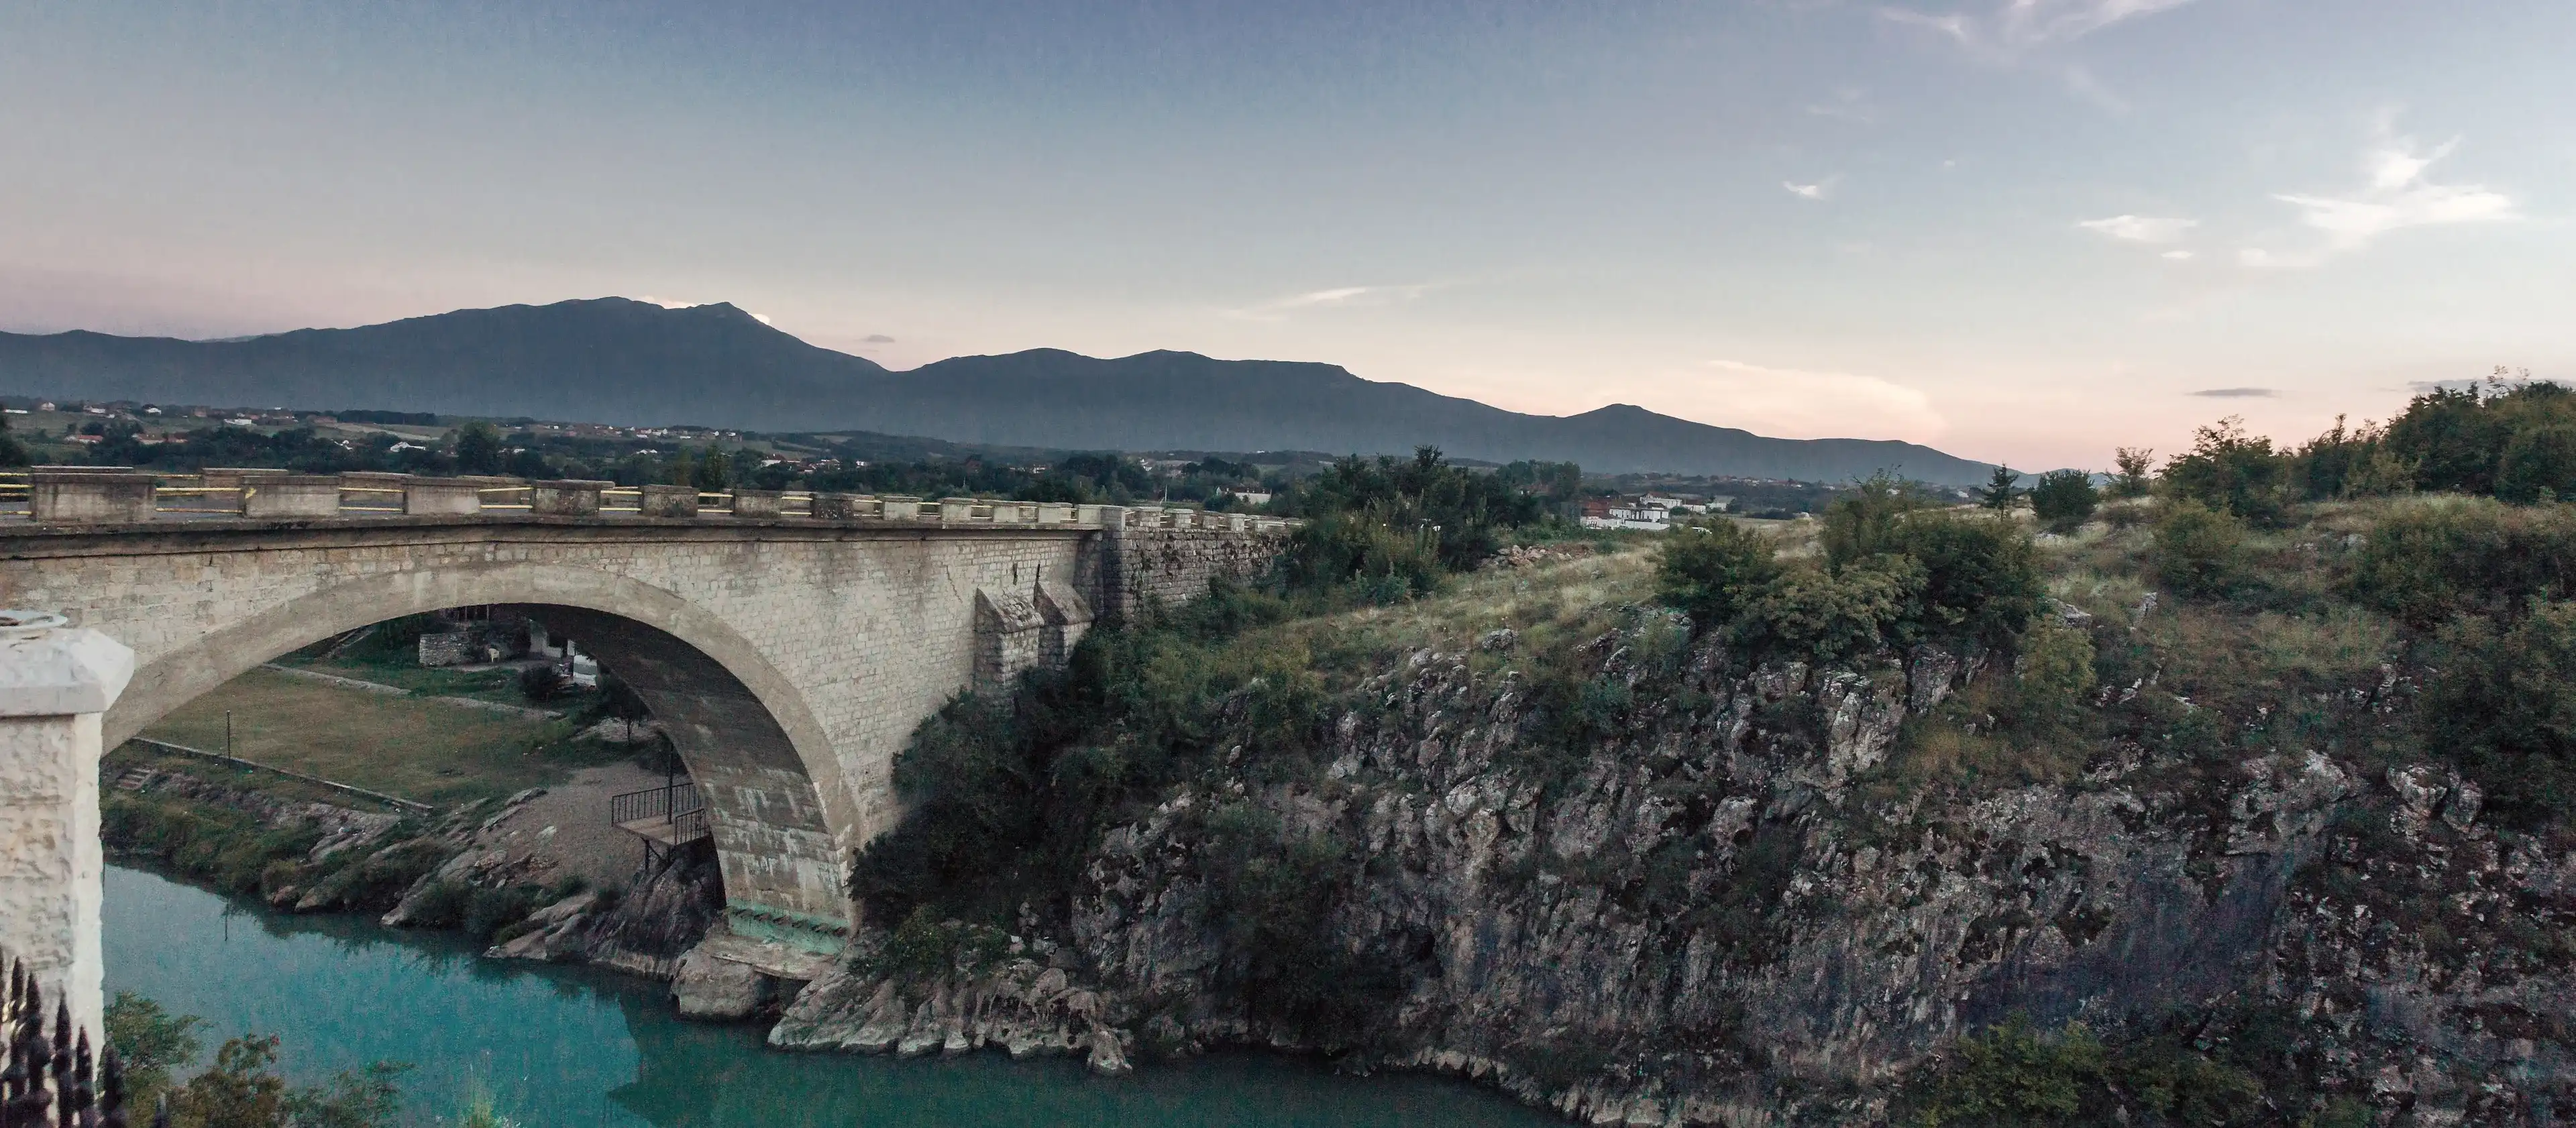 Panoramic view of the ancient holy bridge in Gjakovs, Kosovo in the evening atmoshpere